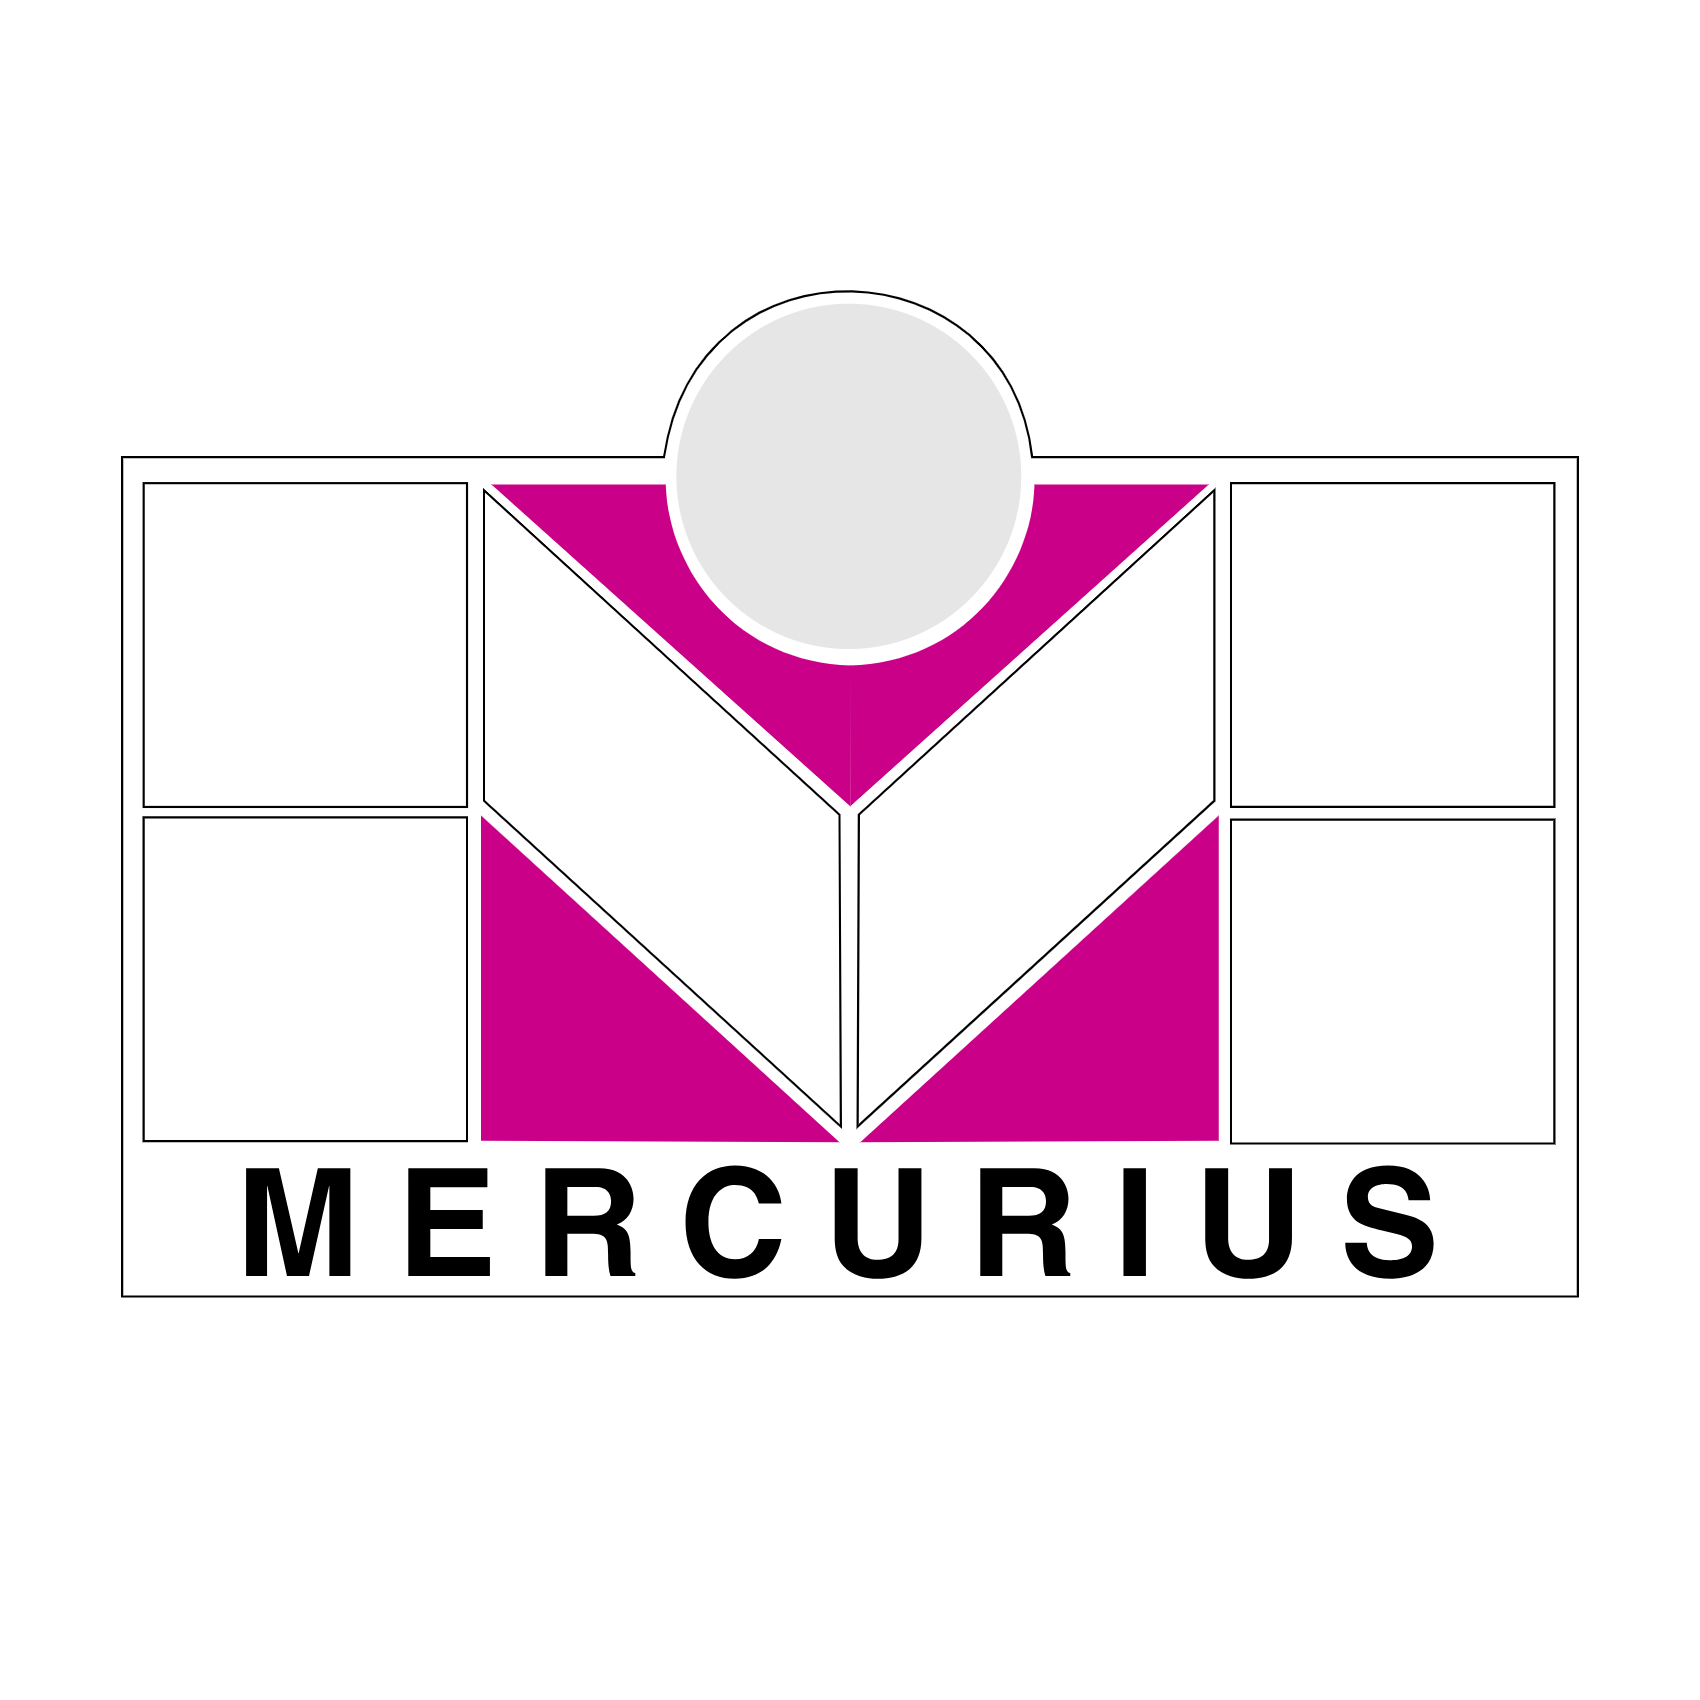 Download Mercurius Logo PNG and Vector (PDF, SVG, Ai, EPS) Free